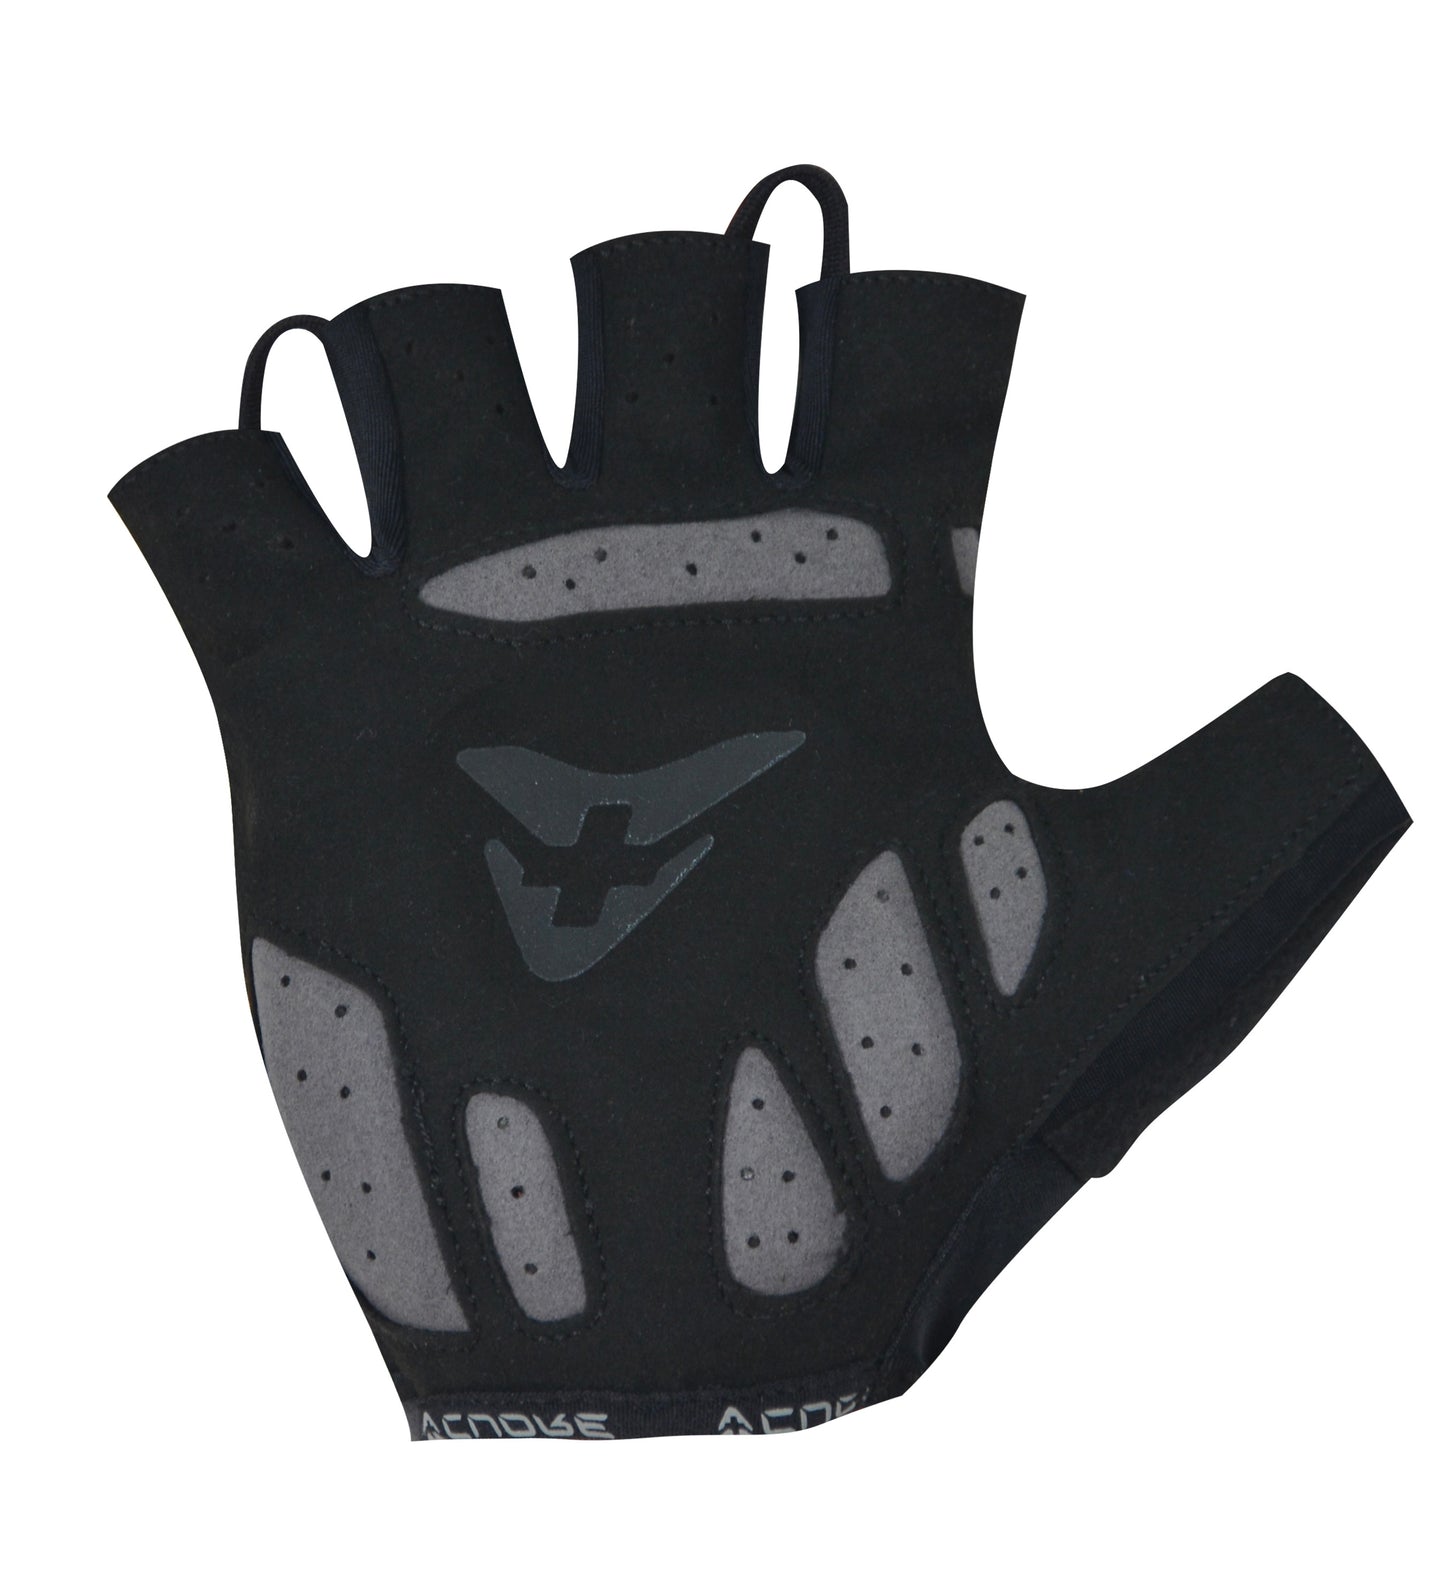 Cycling short fingered gloves.